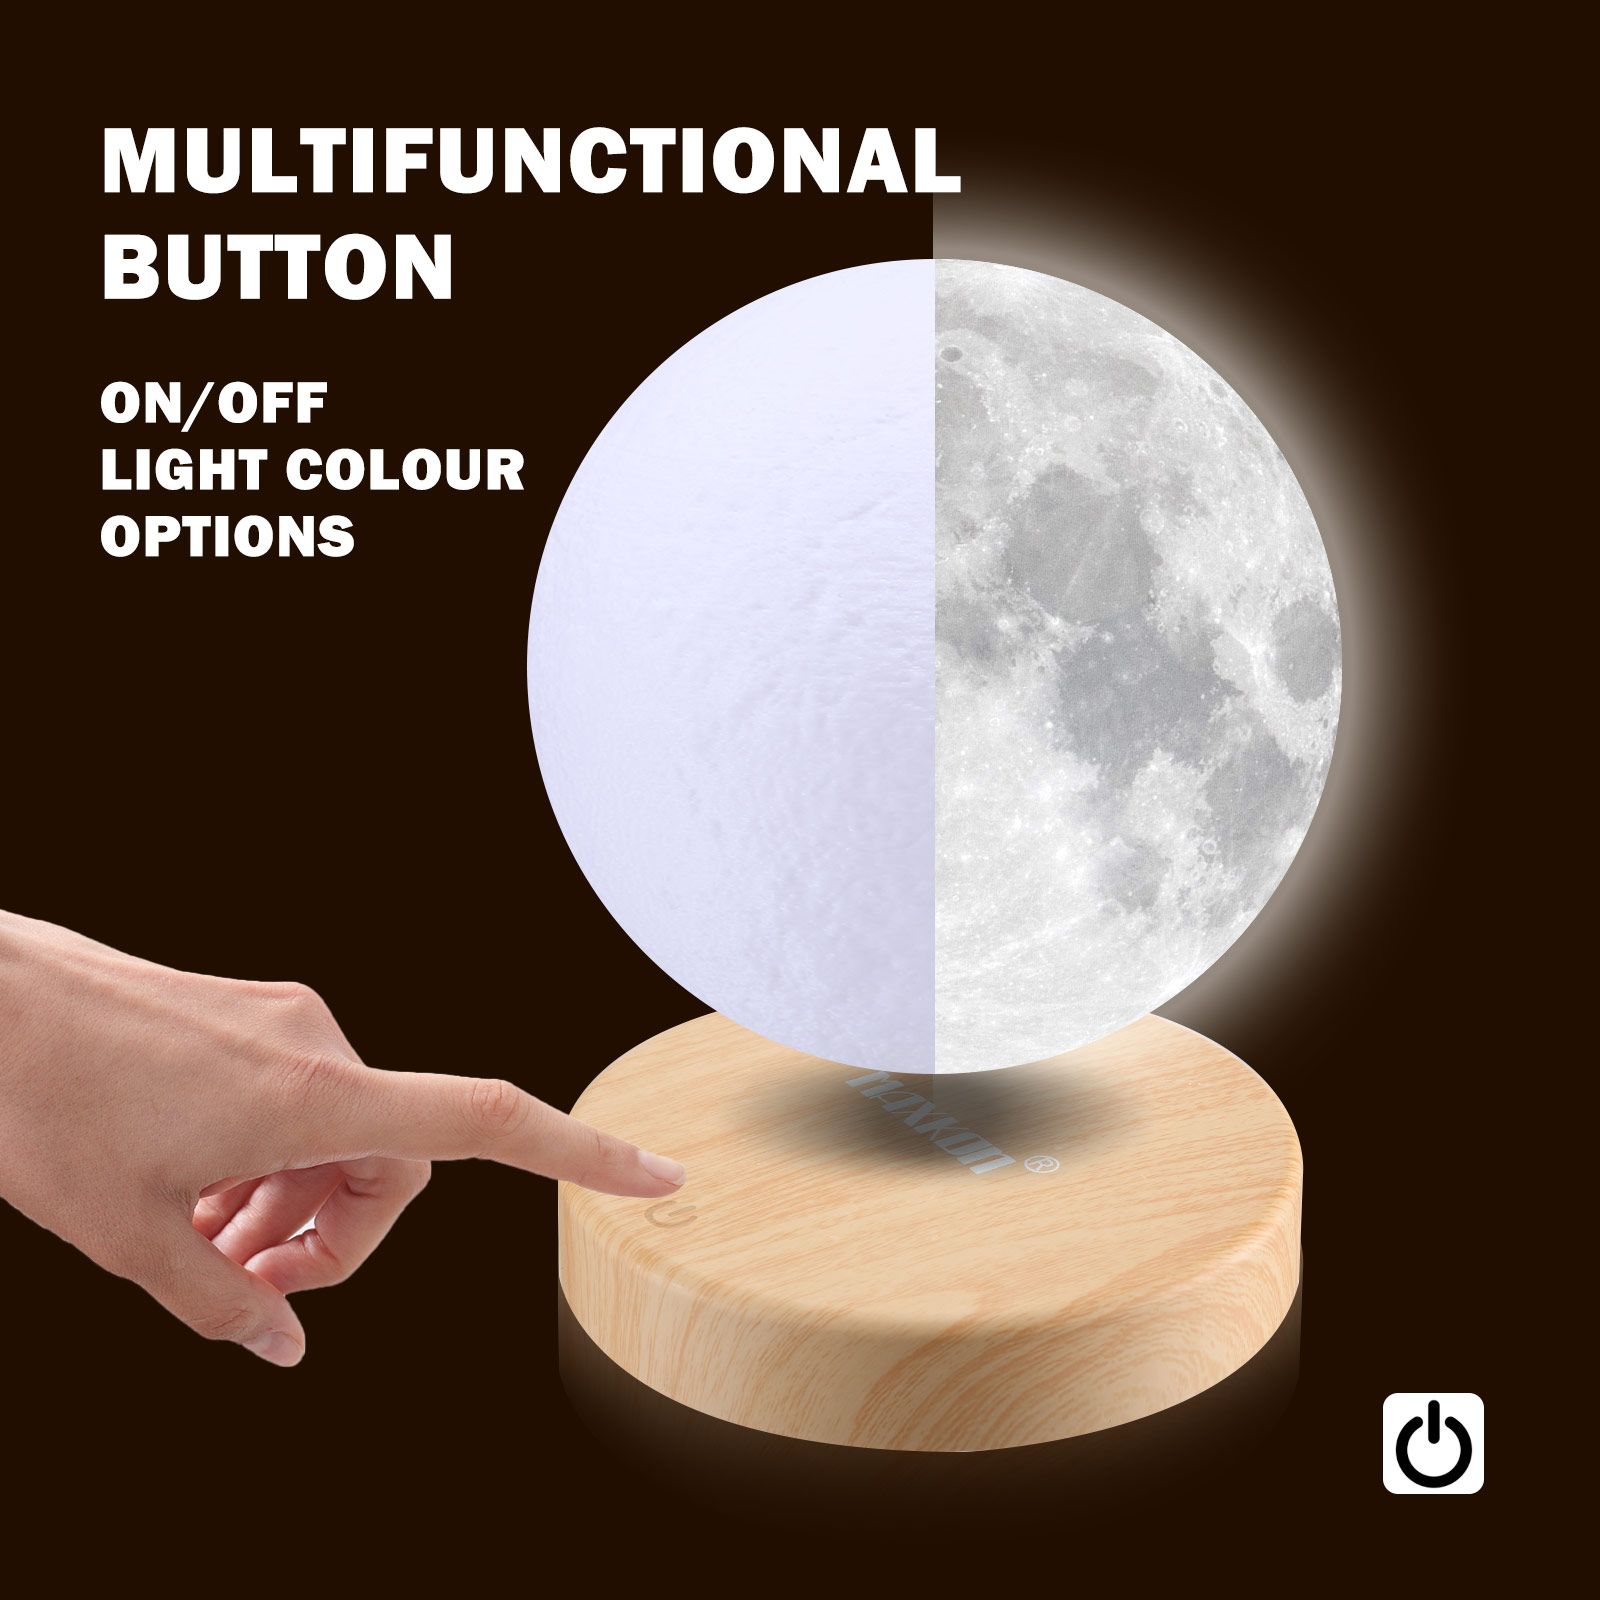 Levitating Moon Light LED Table Night Lamp Bedside Floating 360 Degree Spinning Magnetic 3D Printing Home Decor 3 Colours